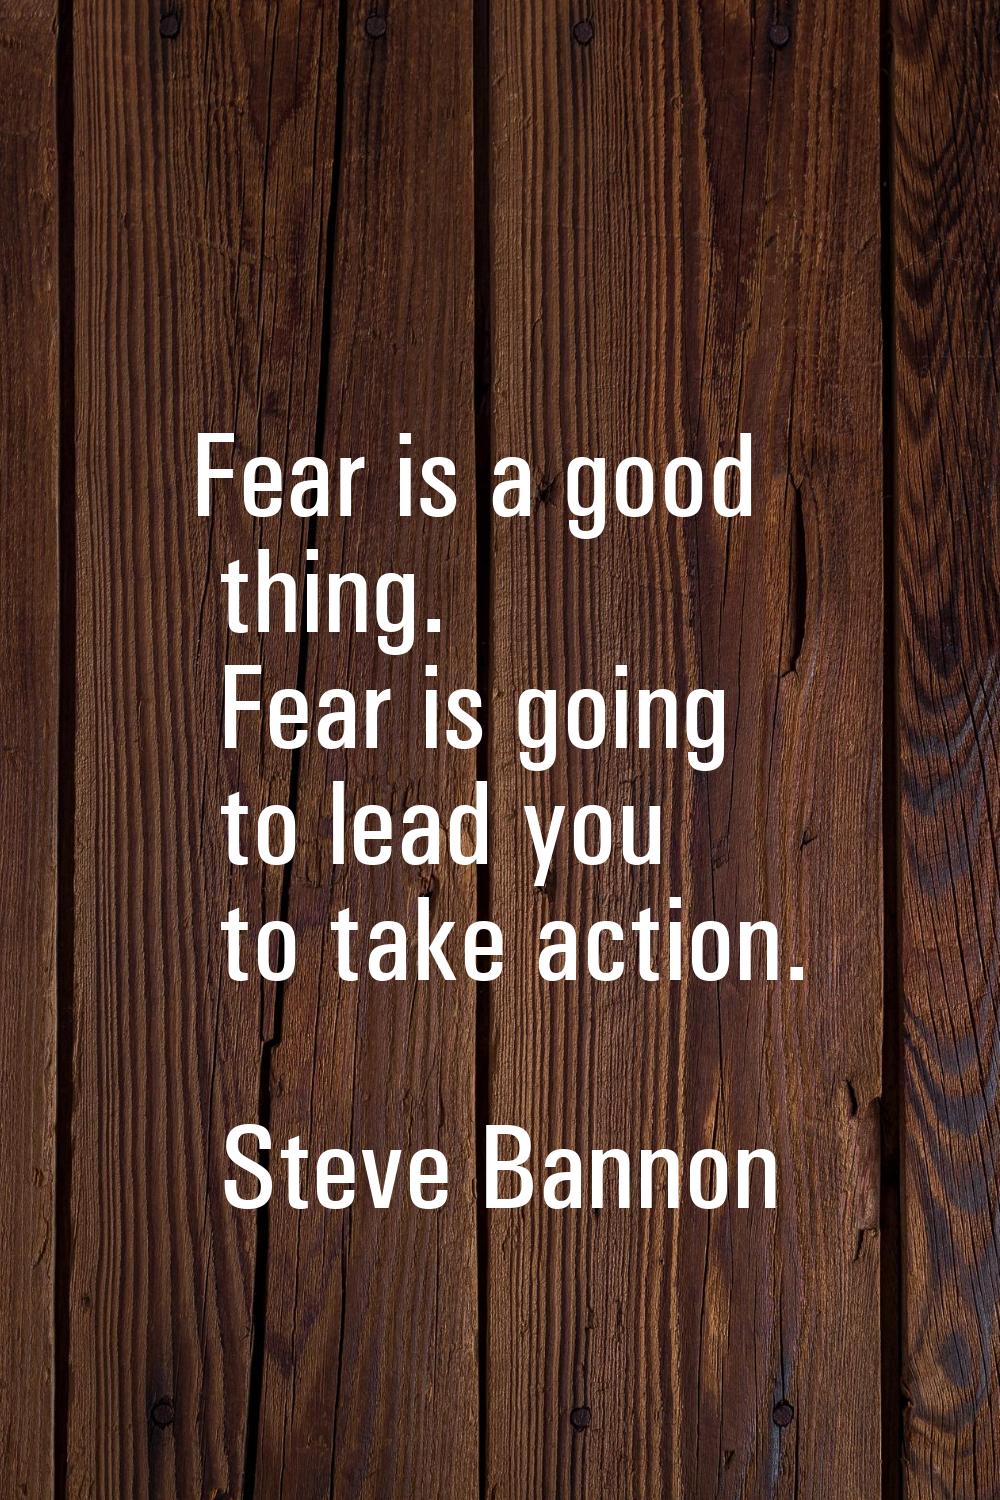 Fear is a good thing. Fear is going to lead you to take action.